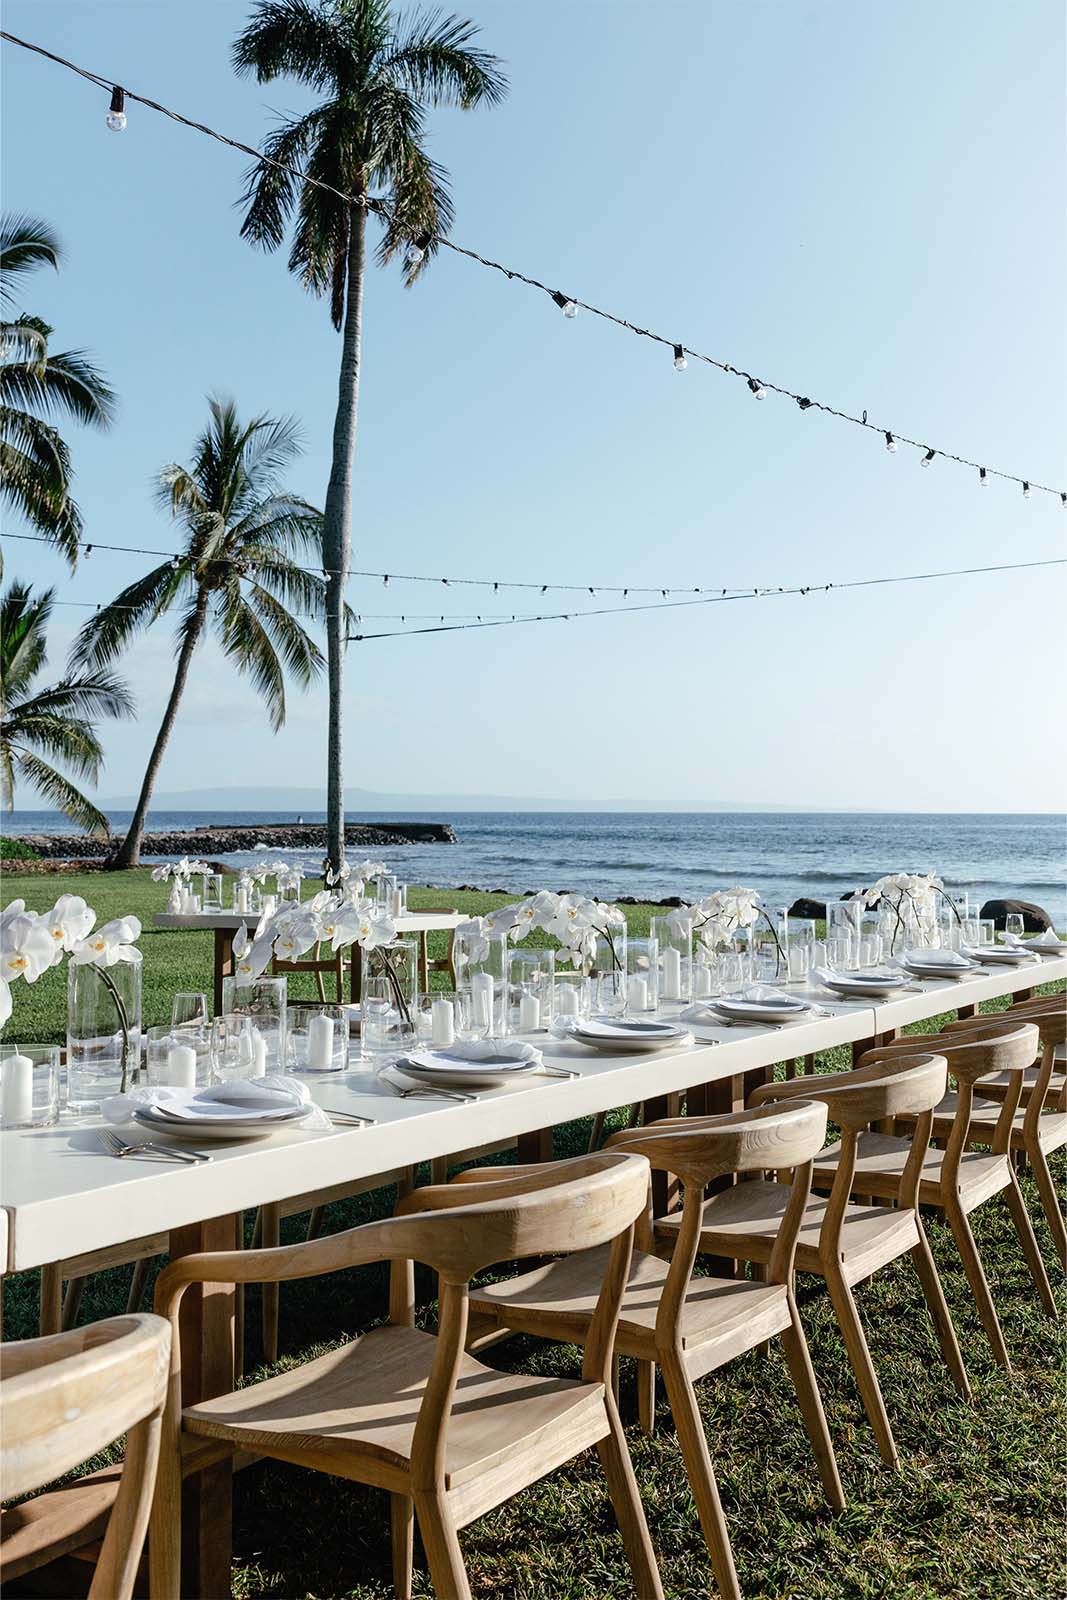 Table layout in Maui, Hawii